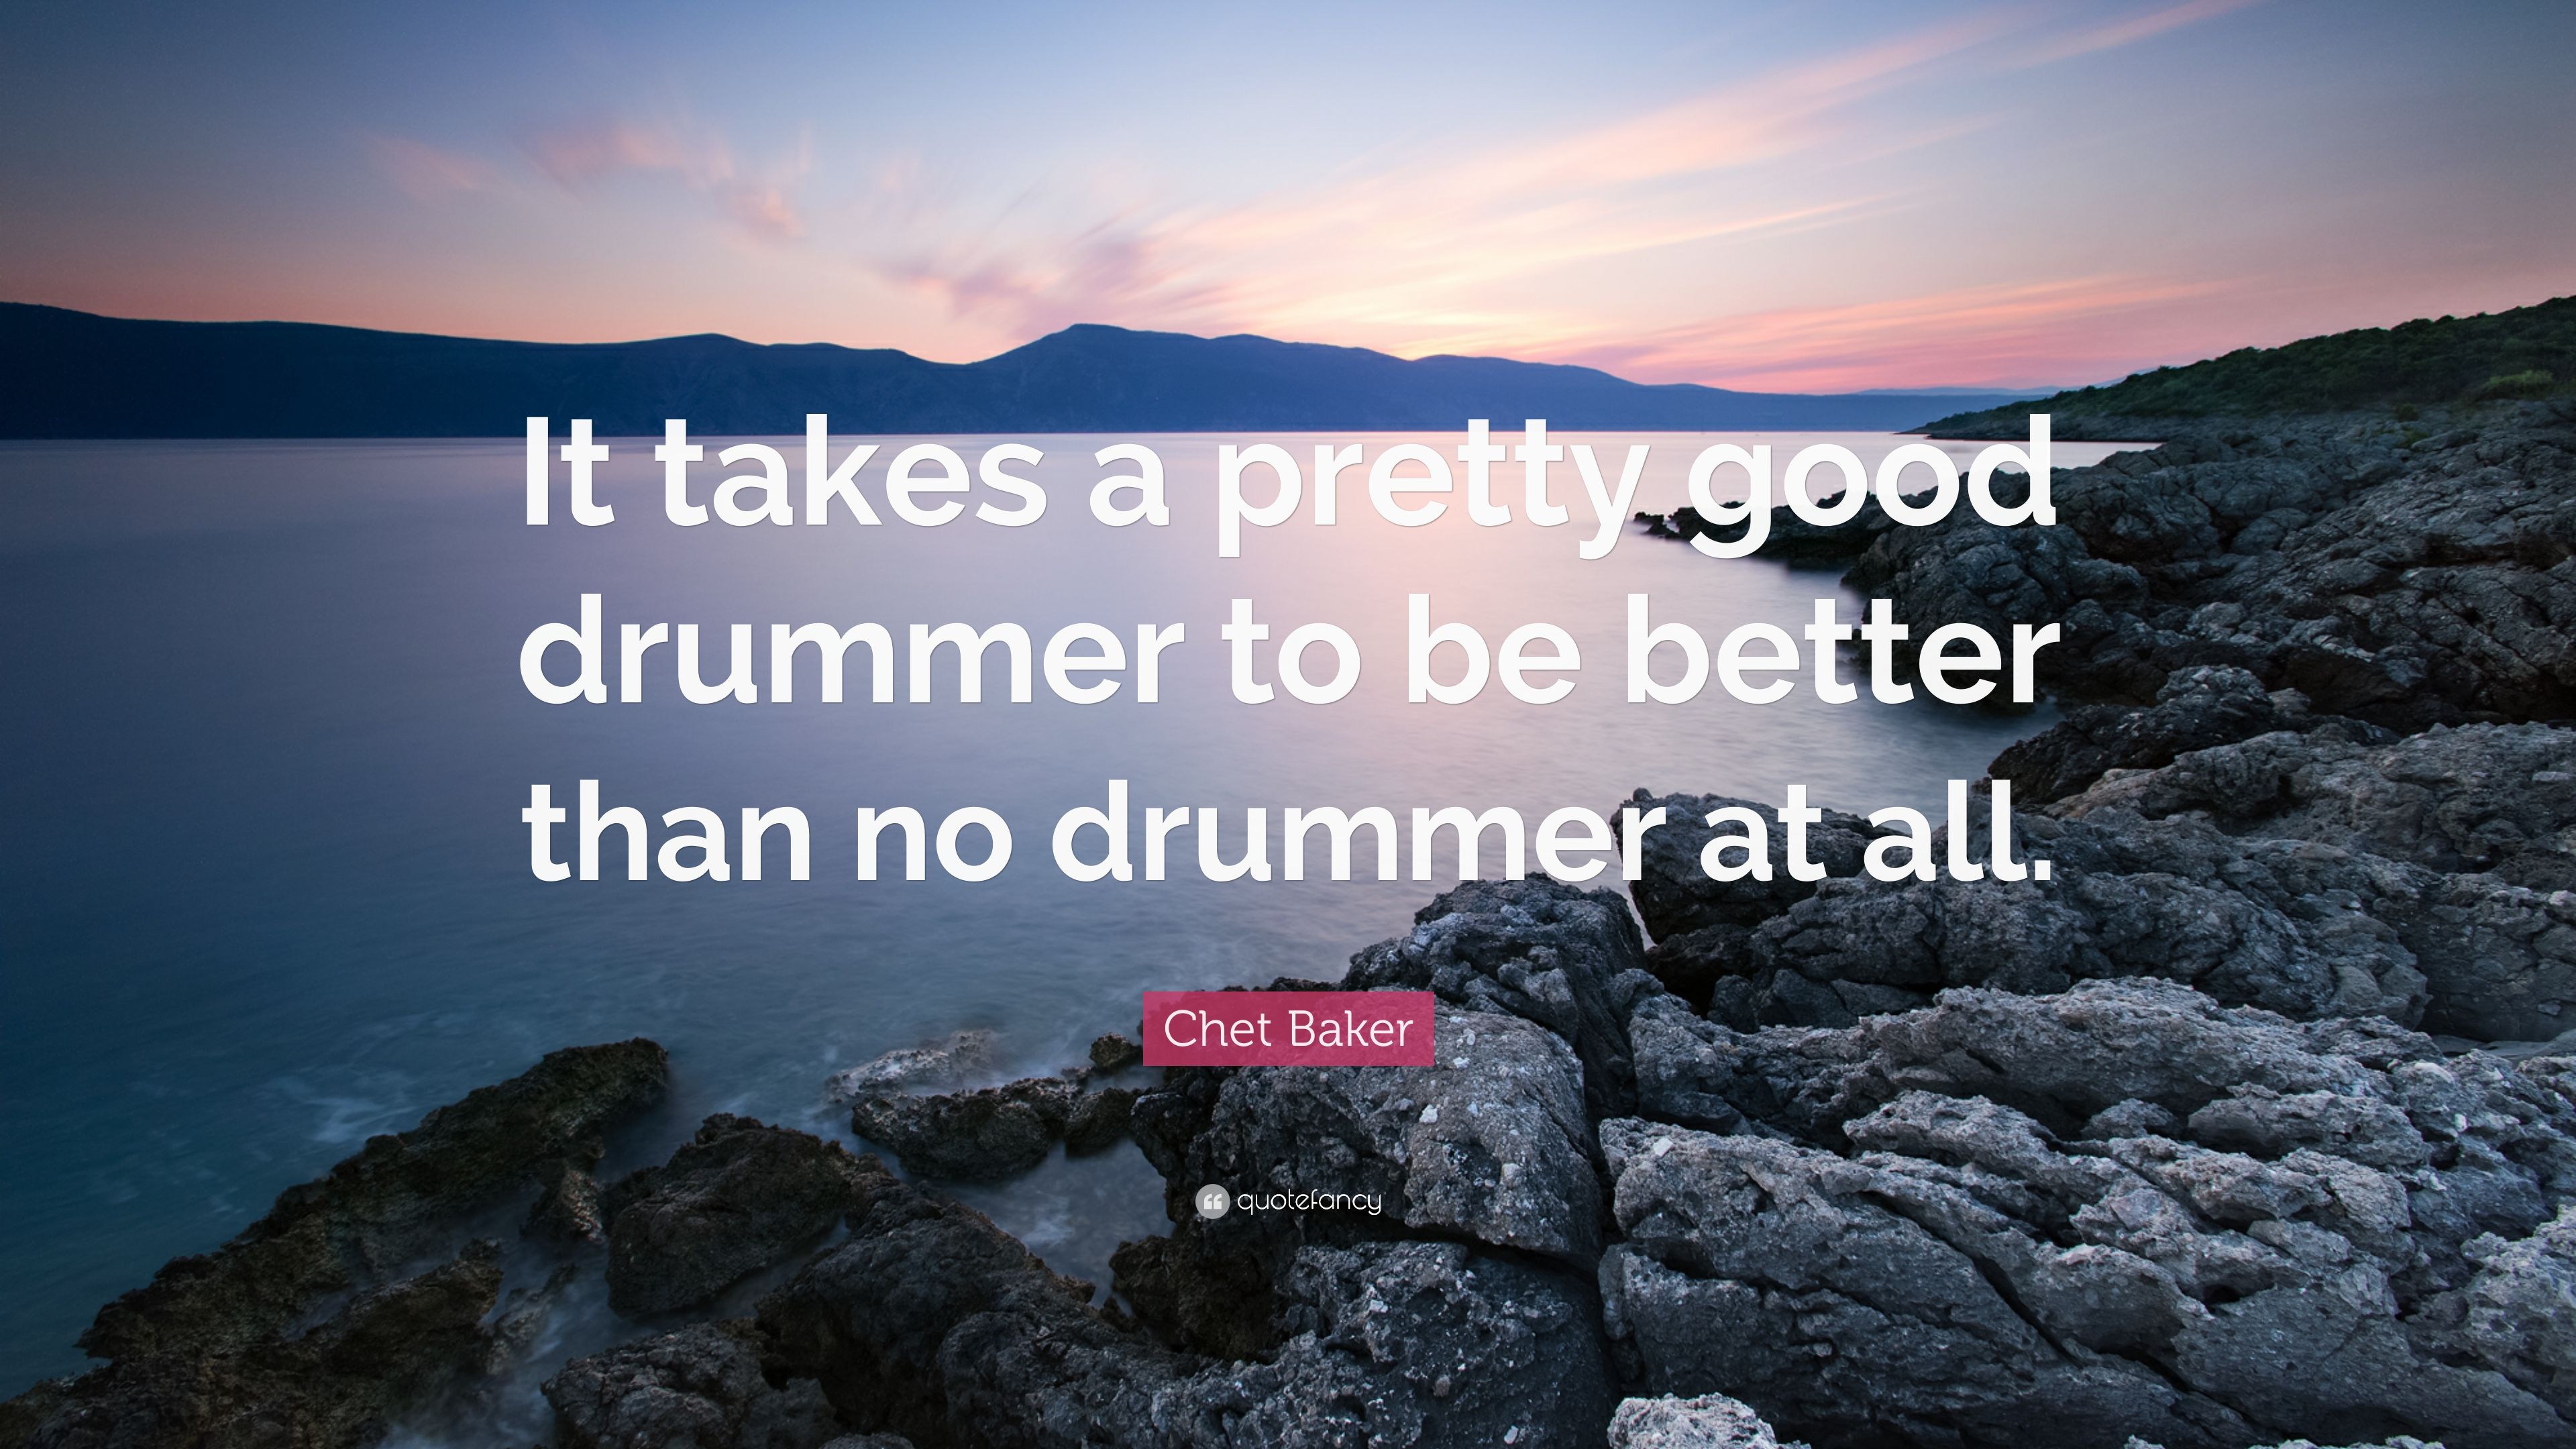 Chet Baker Quote: “It takes a pretty good drummer to be better